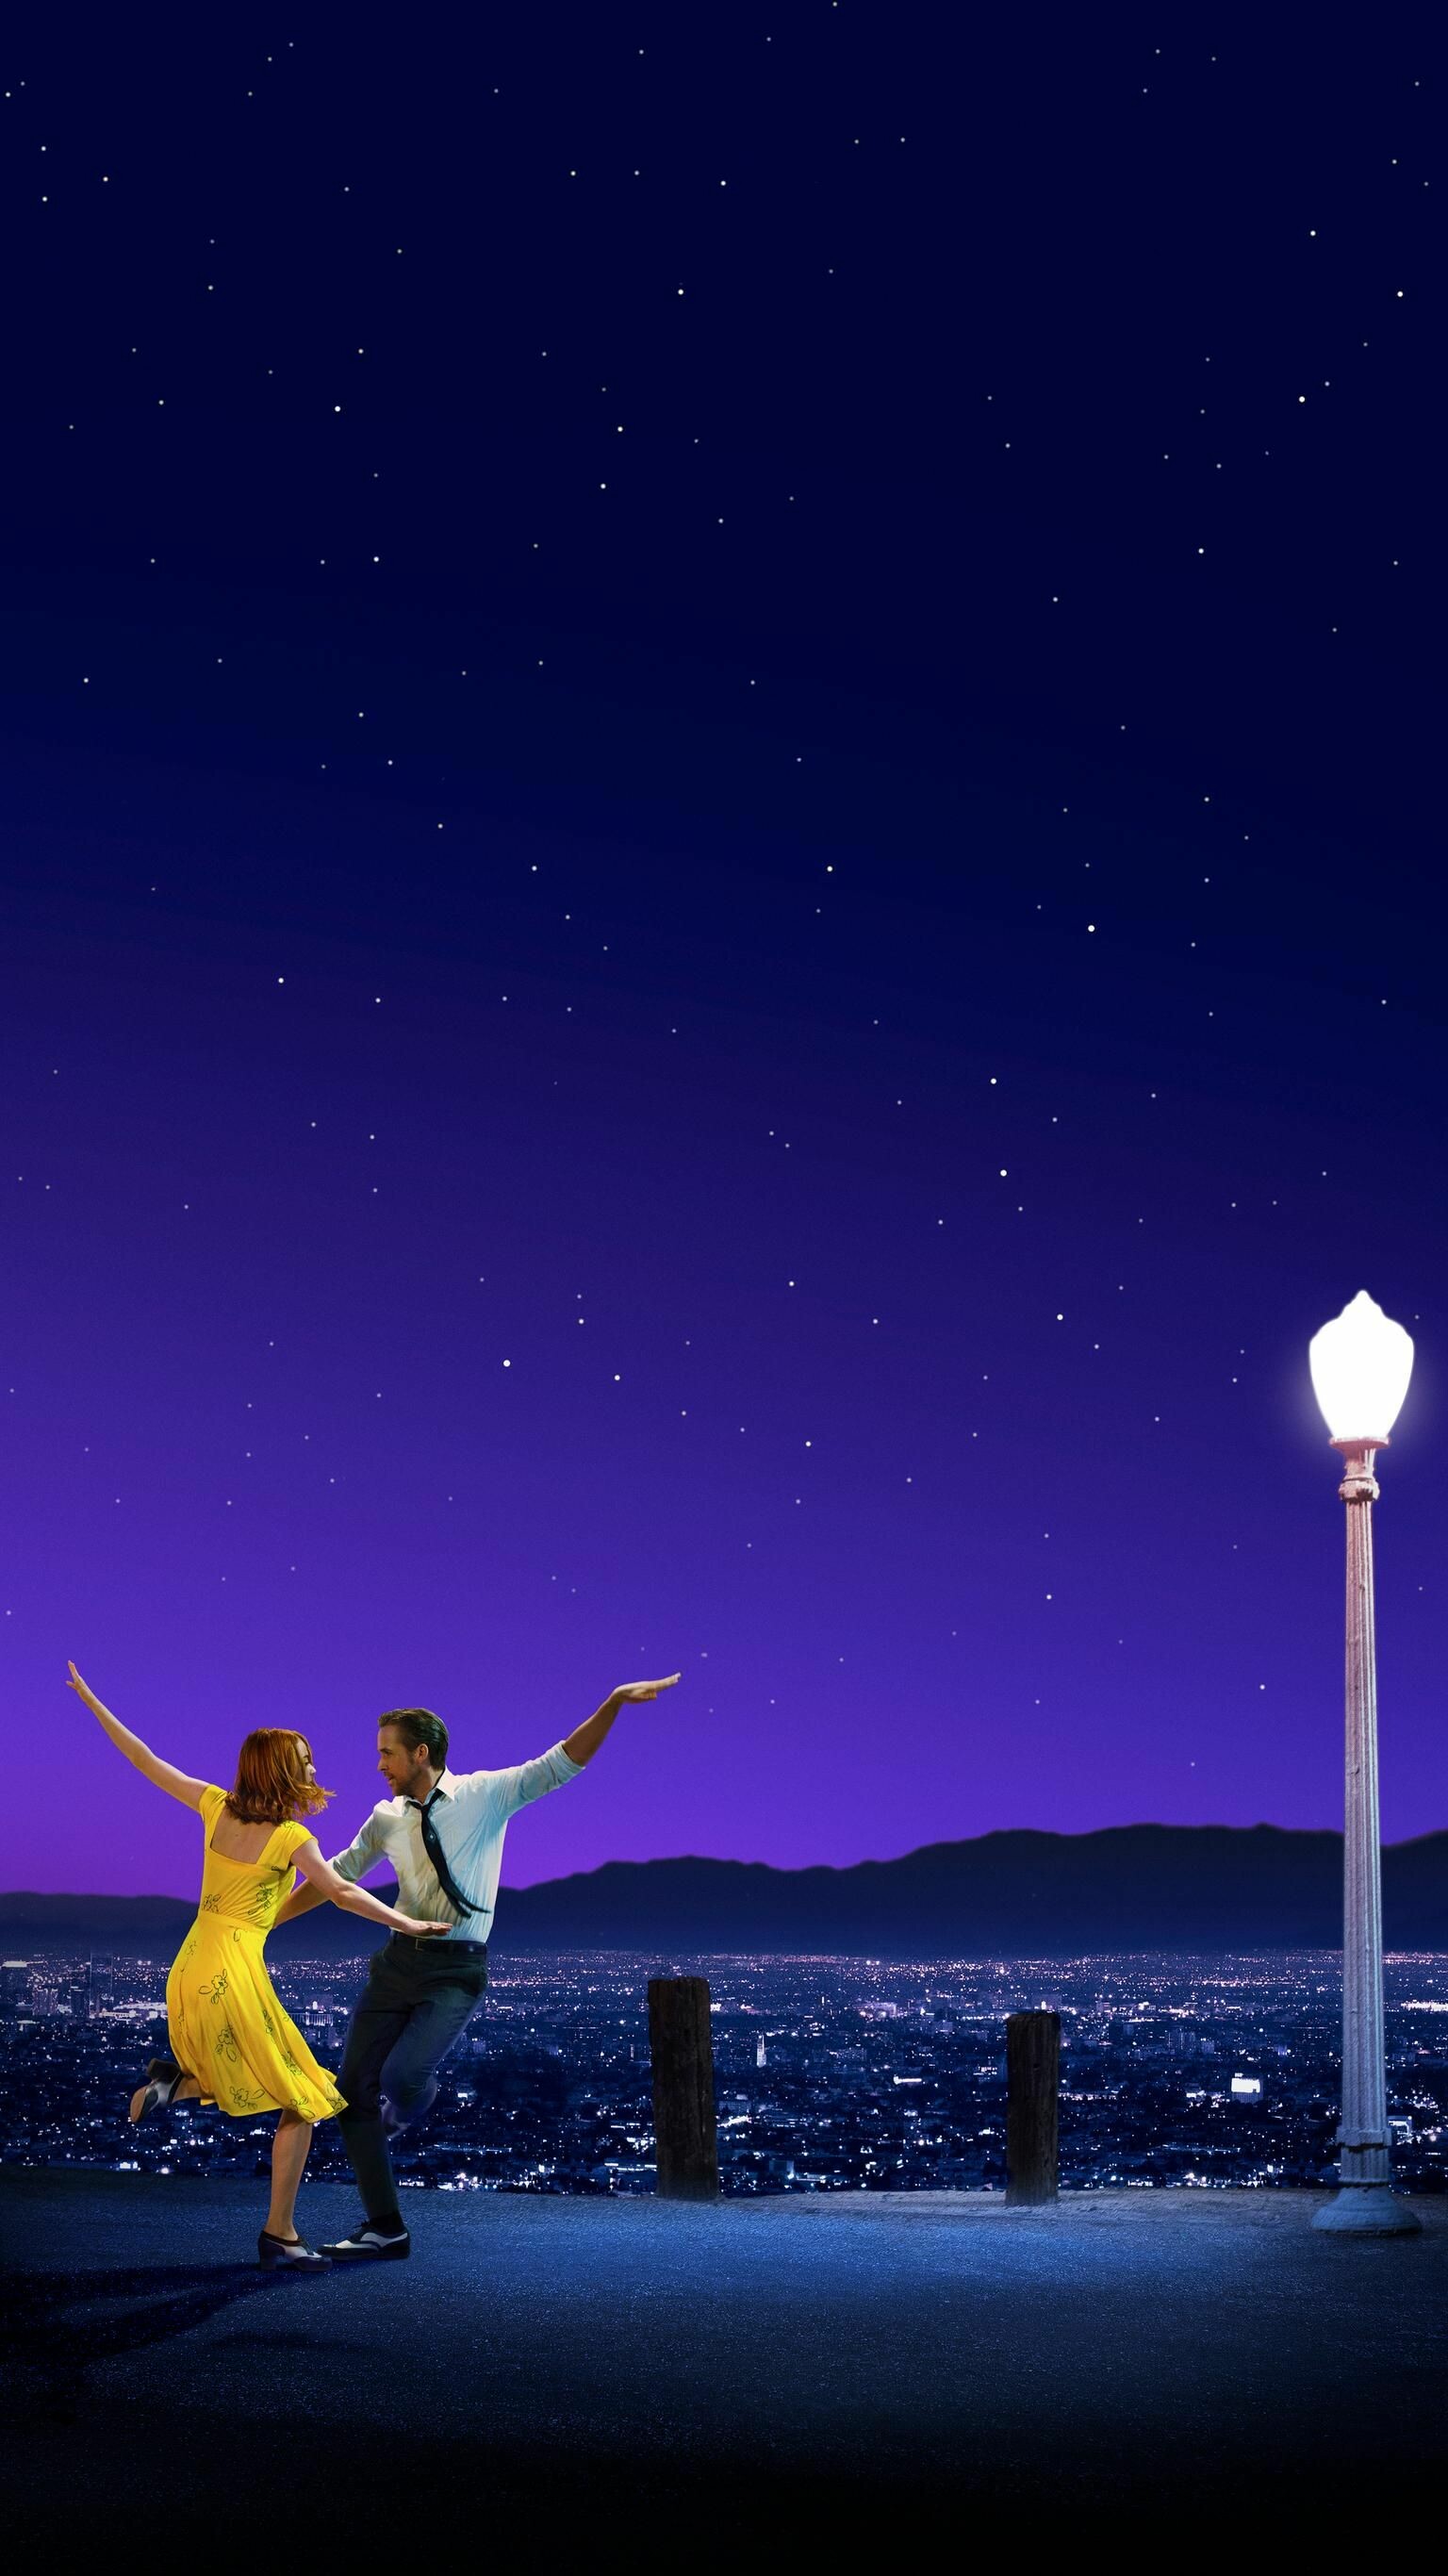 La La Land: The film received a record-tying fourteen nominations at the 89th Academy Awards, winning in six categories, including Best Actress for Stone and Best Director for Chazelle. 1540x2740 HD Wallpaper.